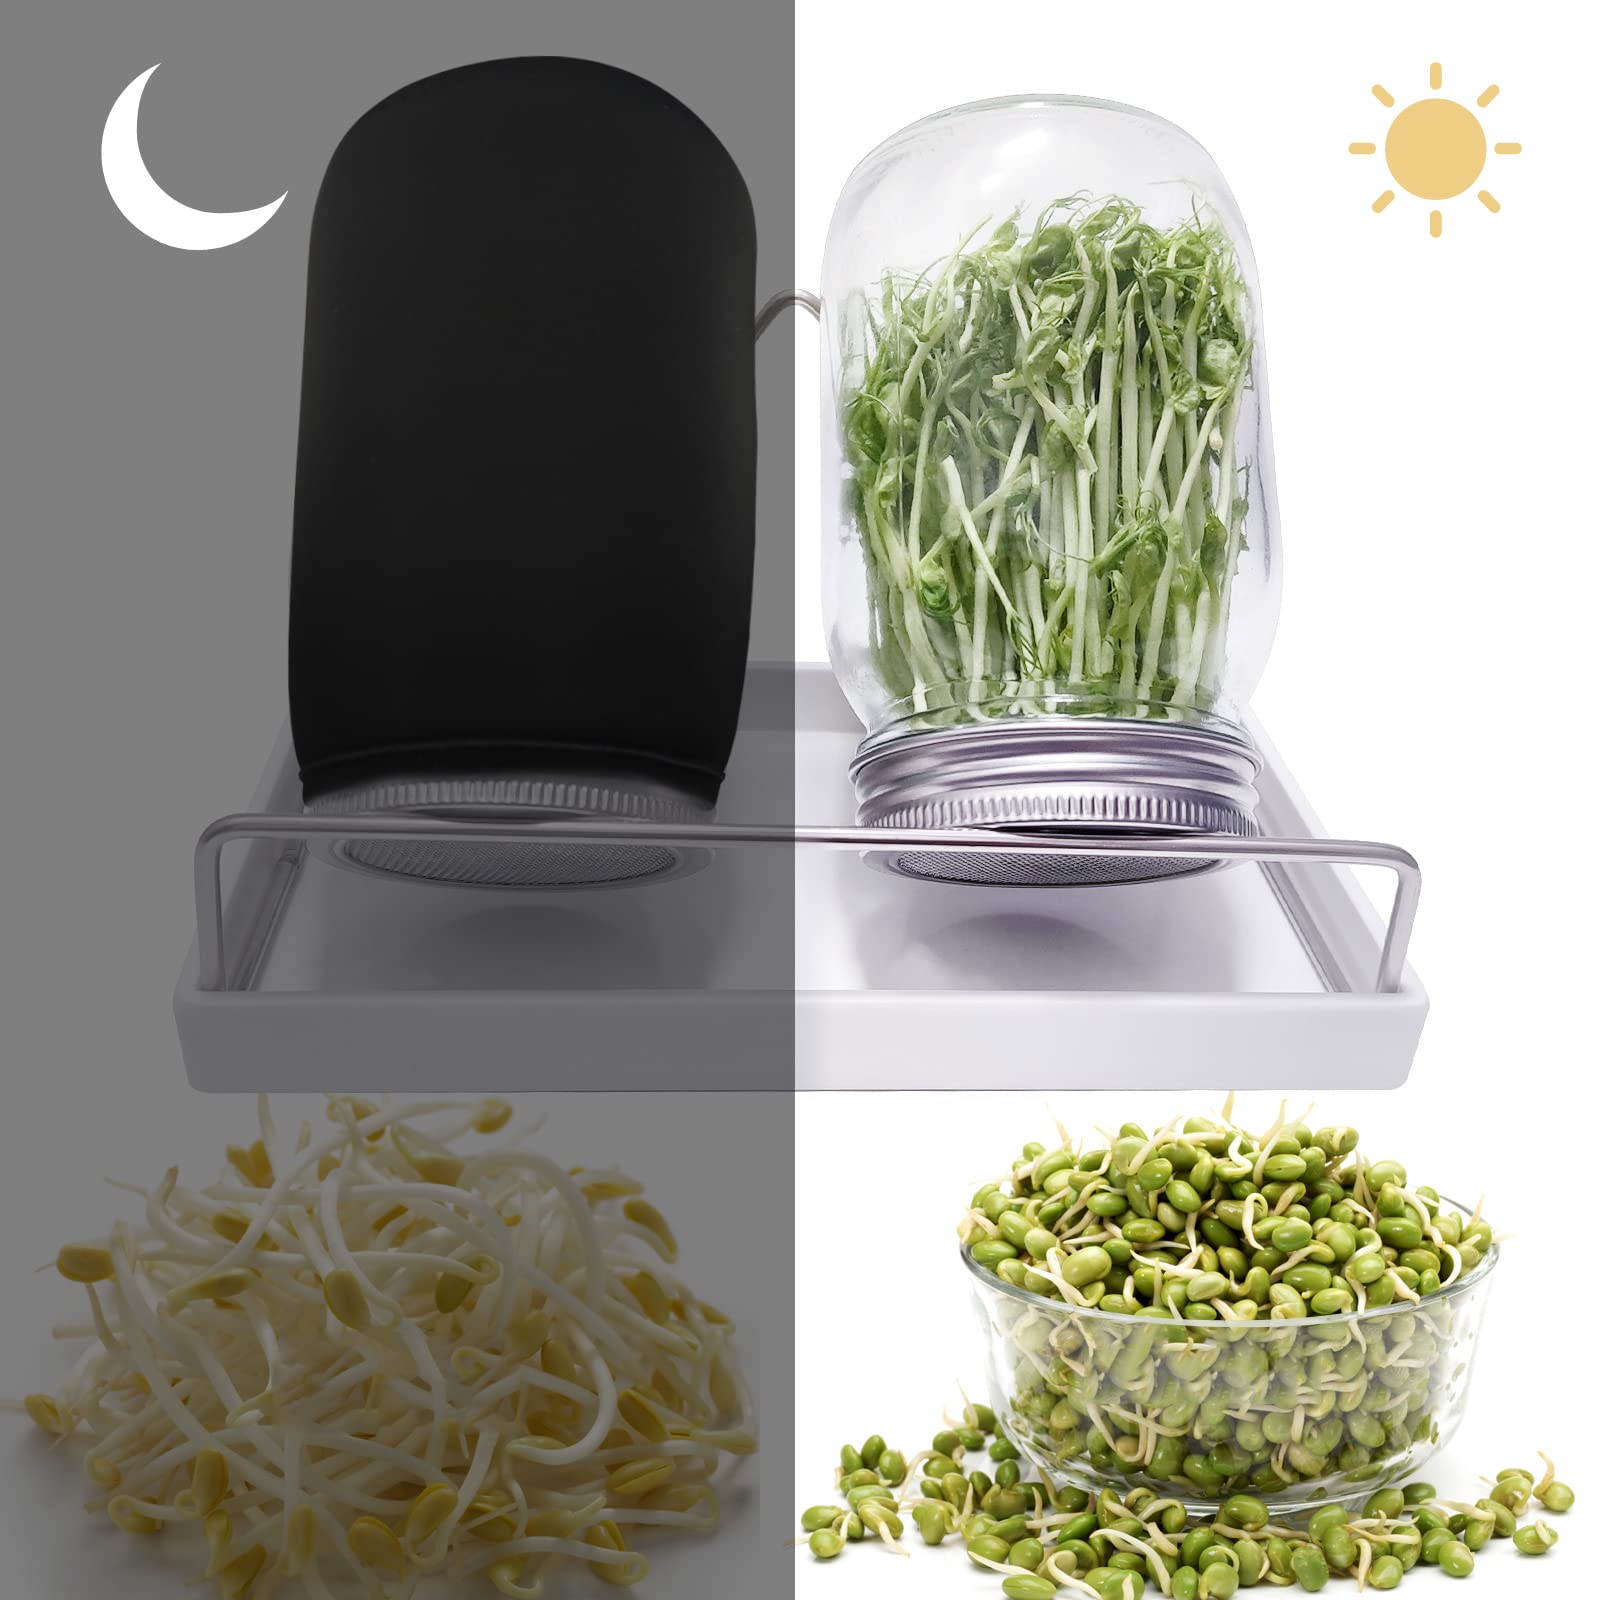 Byazya Sprouting Jar Kit - 4PCS Stainless Steel Screen Sprouting Lids, Tray, 2 Sprouting Jar Stand, for Regular and Wide Mouth Mason Jars (Jars NOT Included) - Growing Broccoli, Alfalfa, Mung Bean